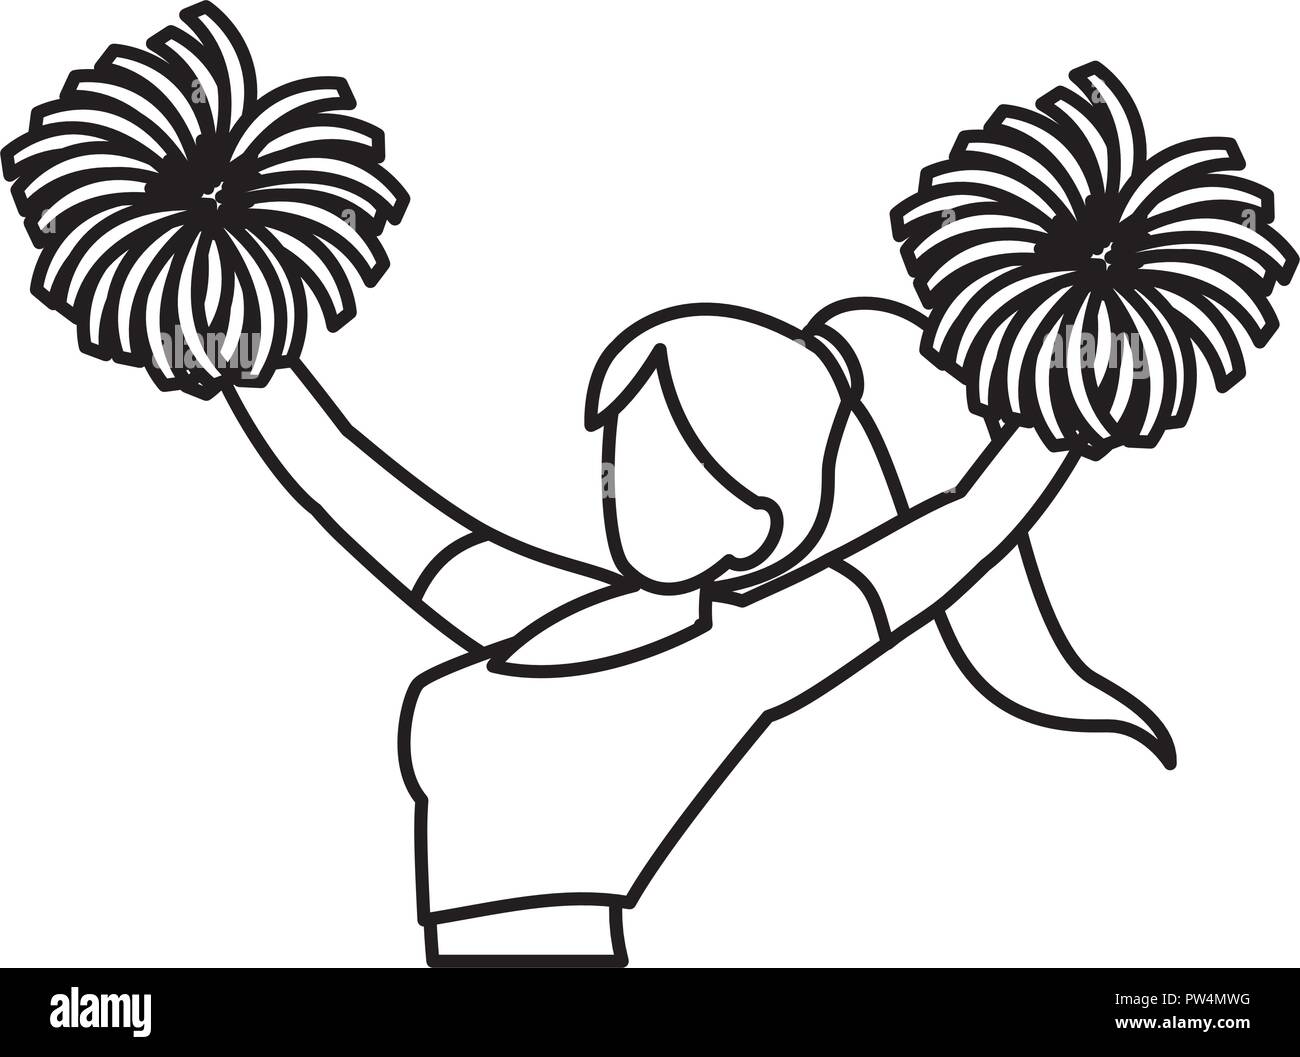 Cheerleader With Pom Poms Over White Background Vector Illustration Stock Vector Image Art Alamy